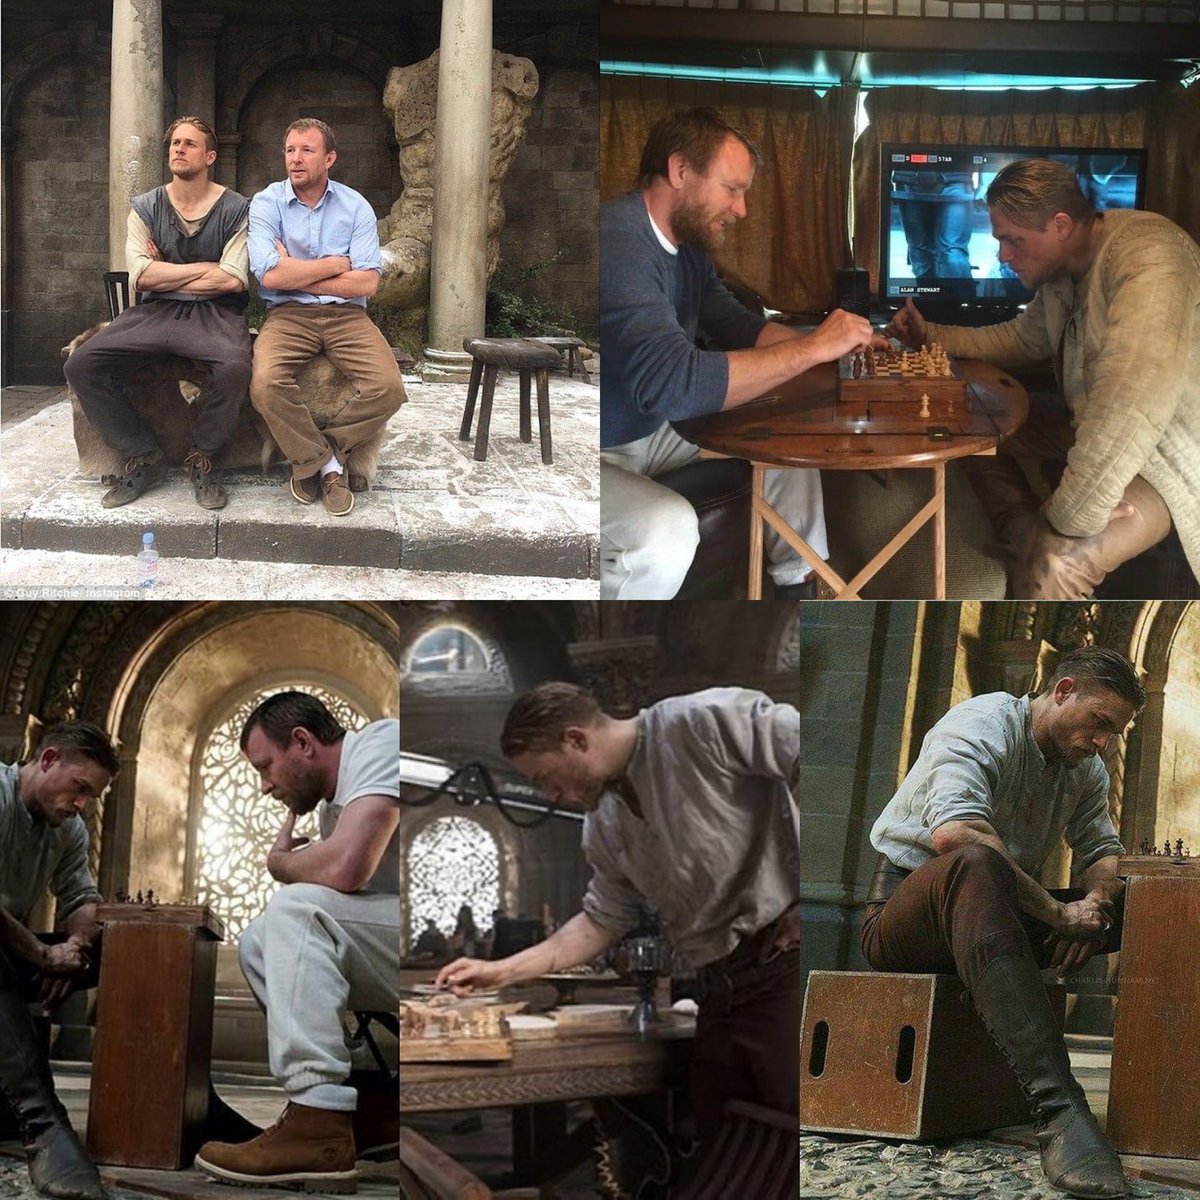 BTS #KingArthur #May2017releasedate #CharlieHunnam #GuyRitchie 
#passingthetime #deepinthought #onset #chessgames #funwiththeboss
#ambitiousendeavor #sexiestmanalive #beautifulman 👑🗡️